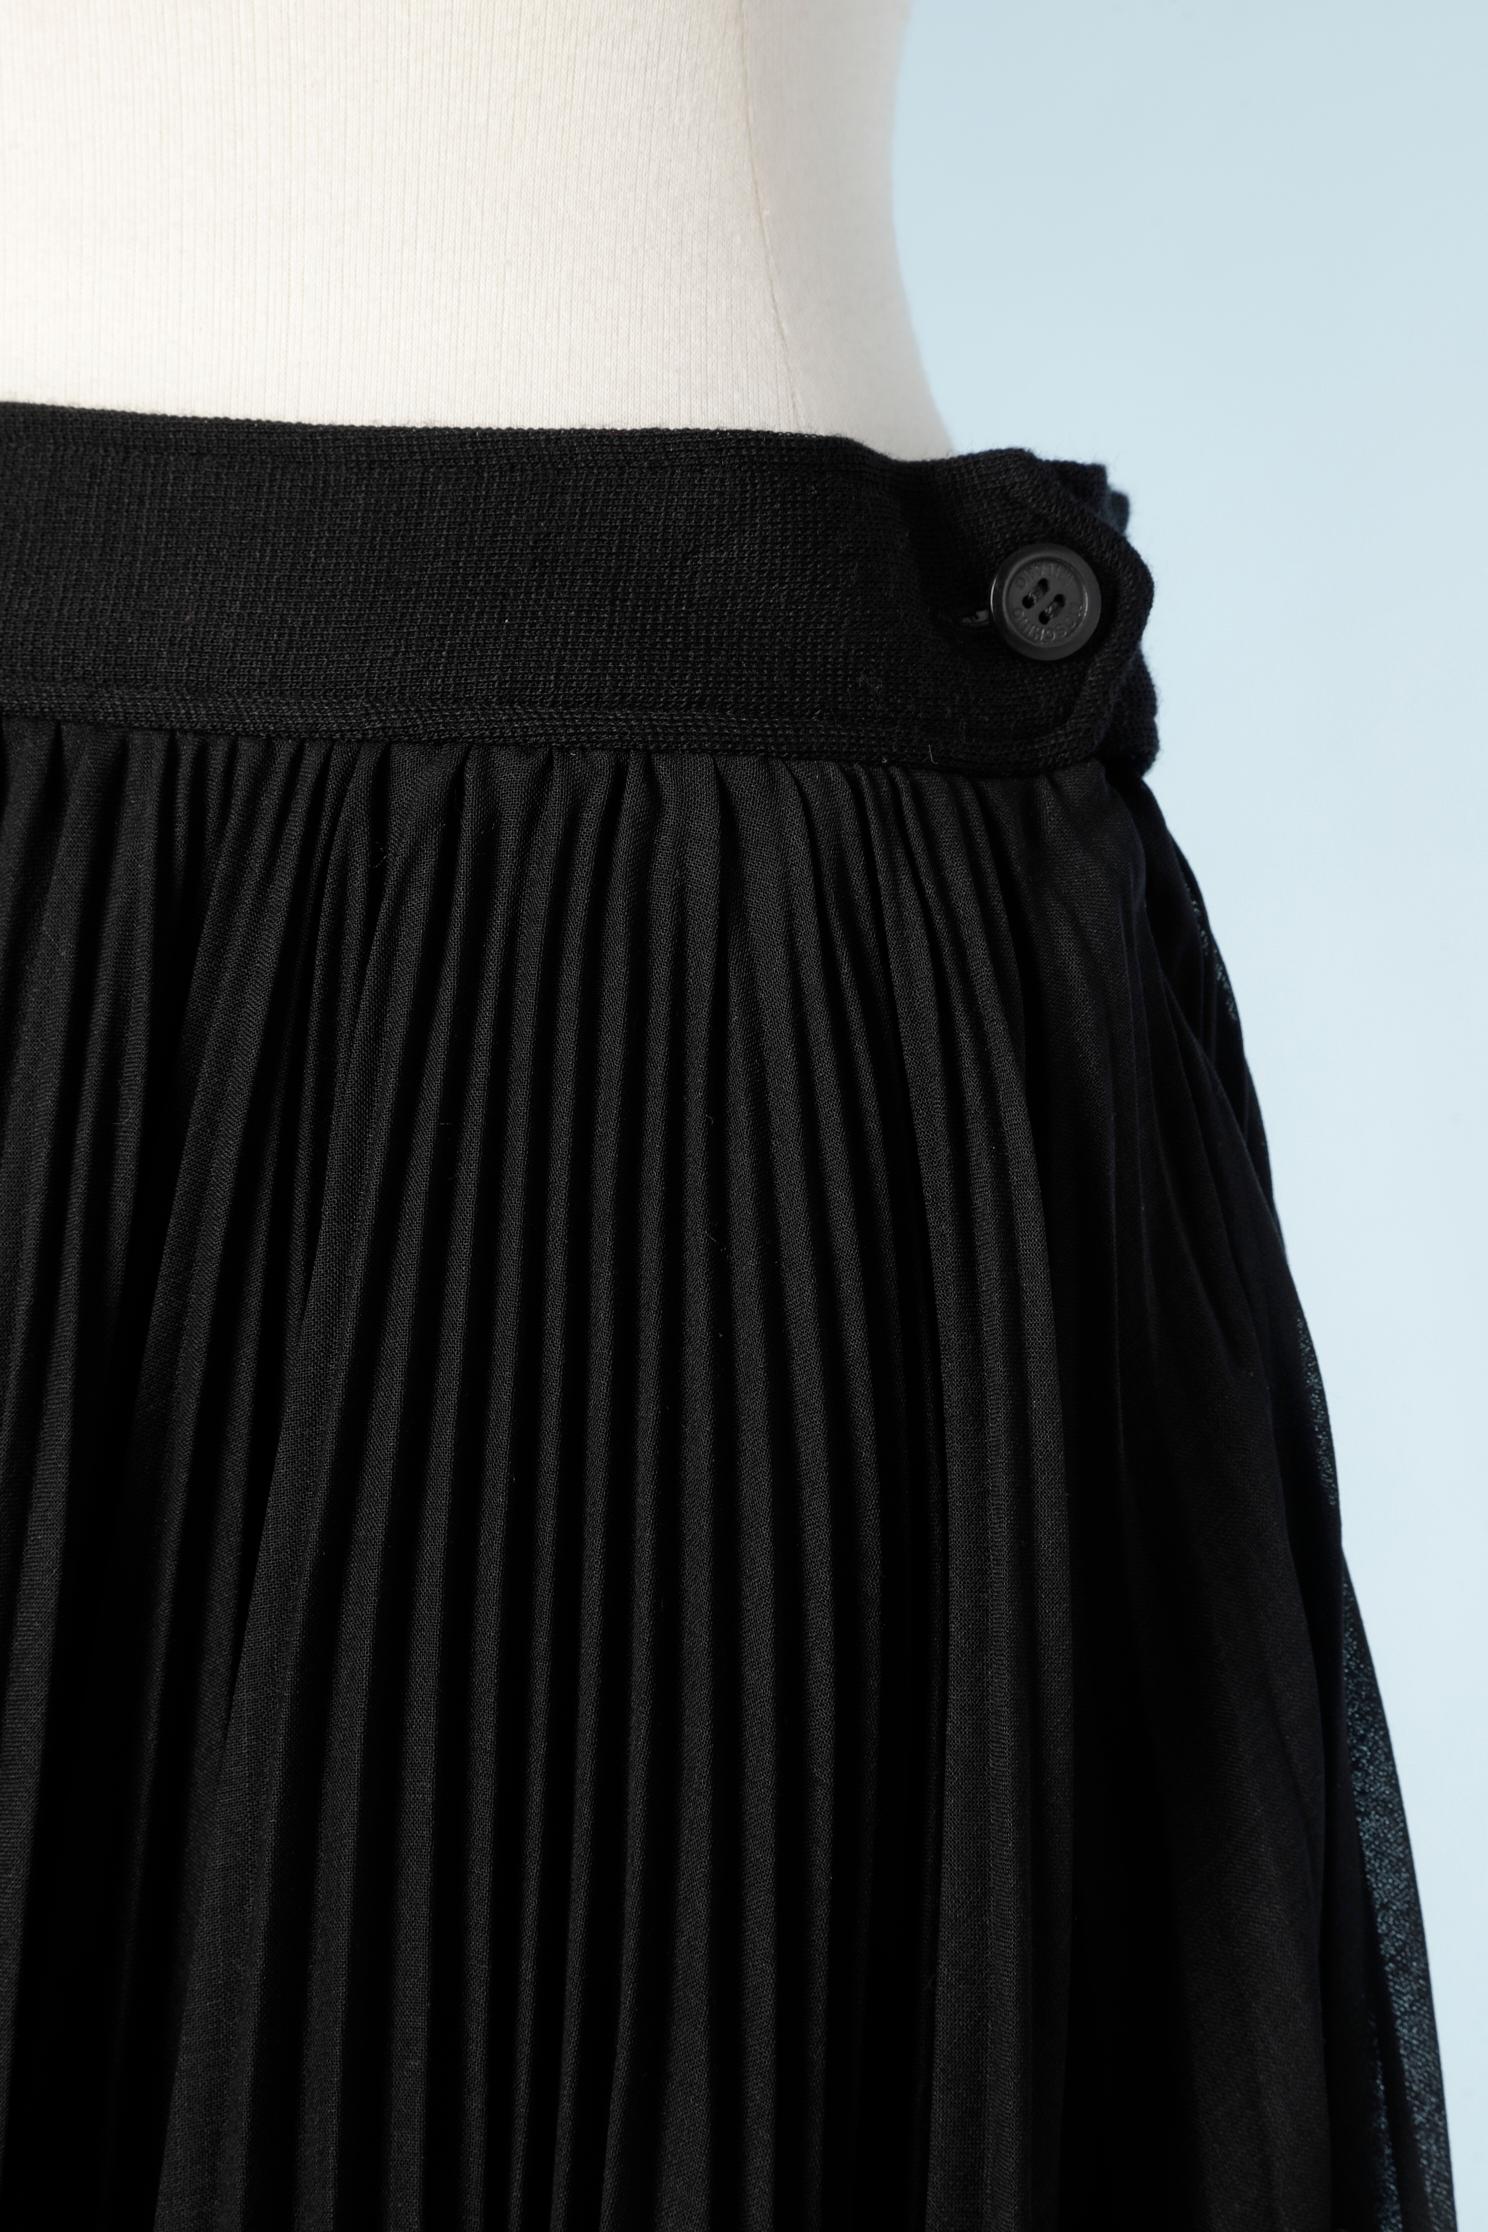 1980's double-layer black skirt. The top layer is in pleated black polyamide and the under layer is in wool jersey pencil skirt shape. 